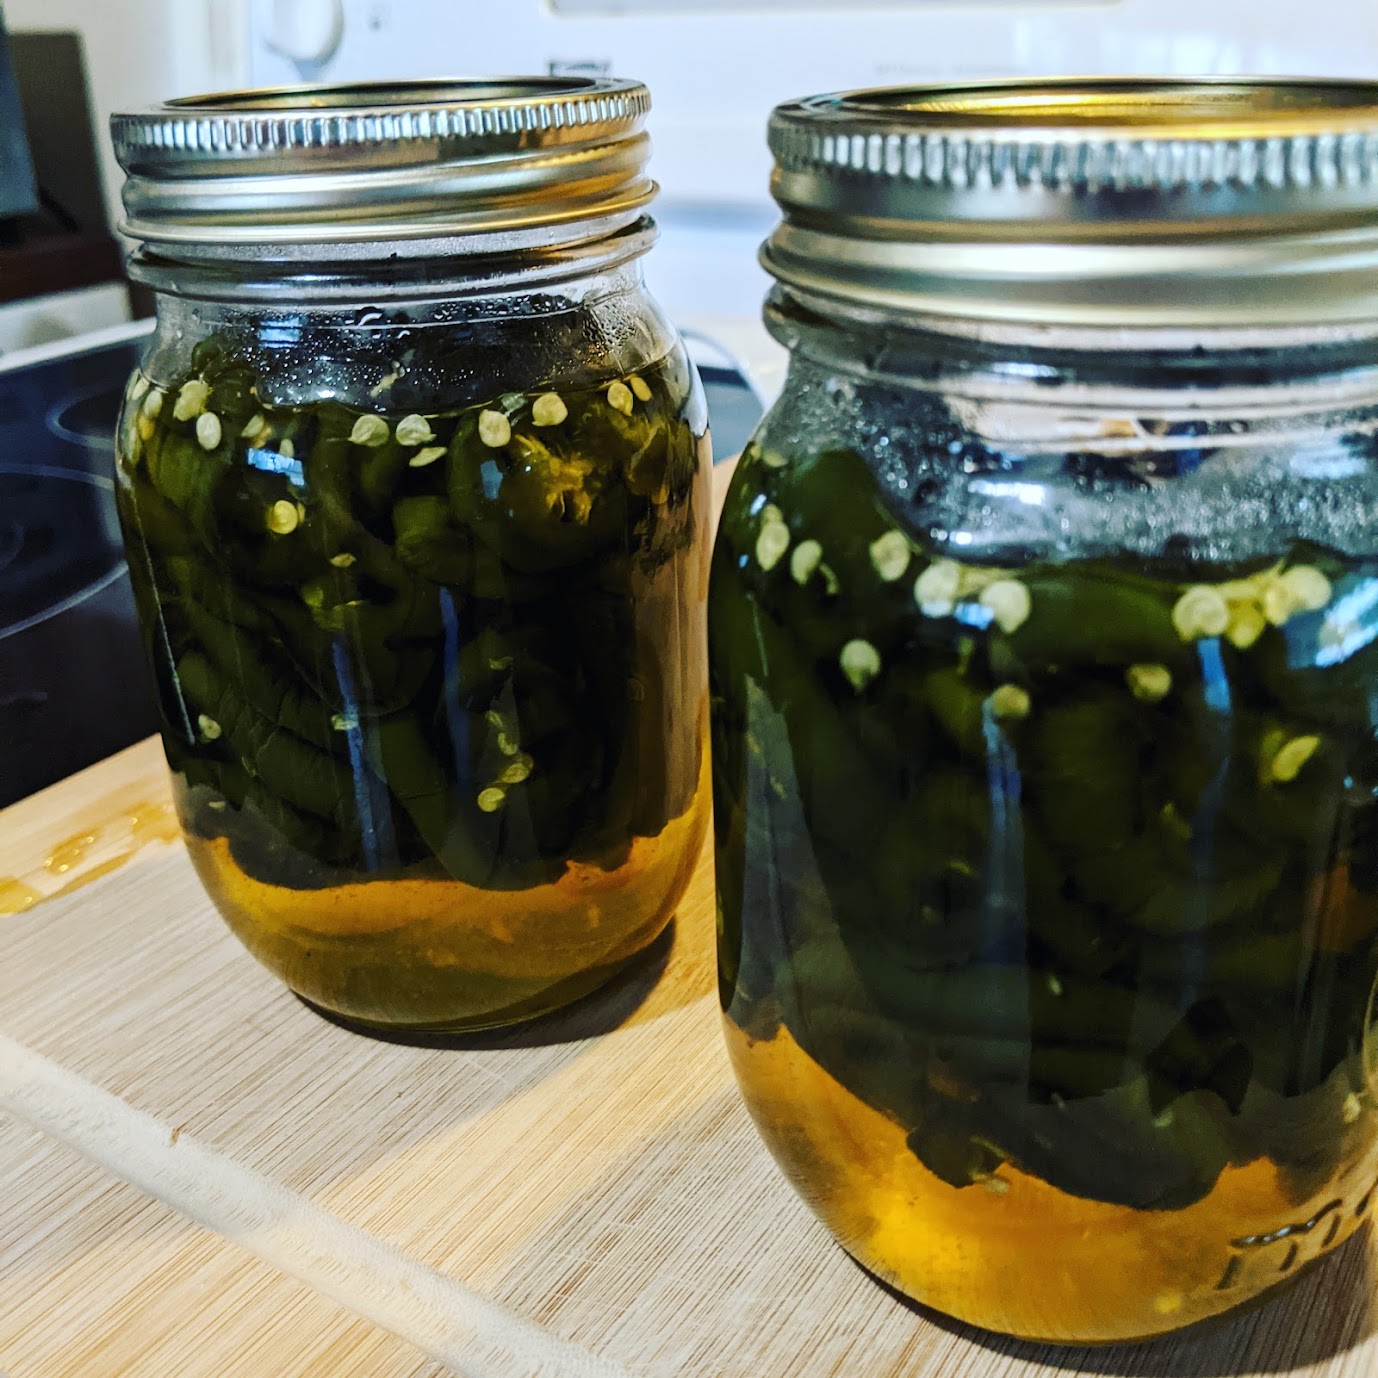 Candied jalapenos, also known as "cowboy candy"